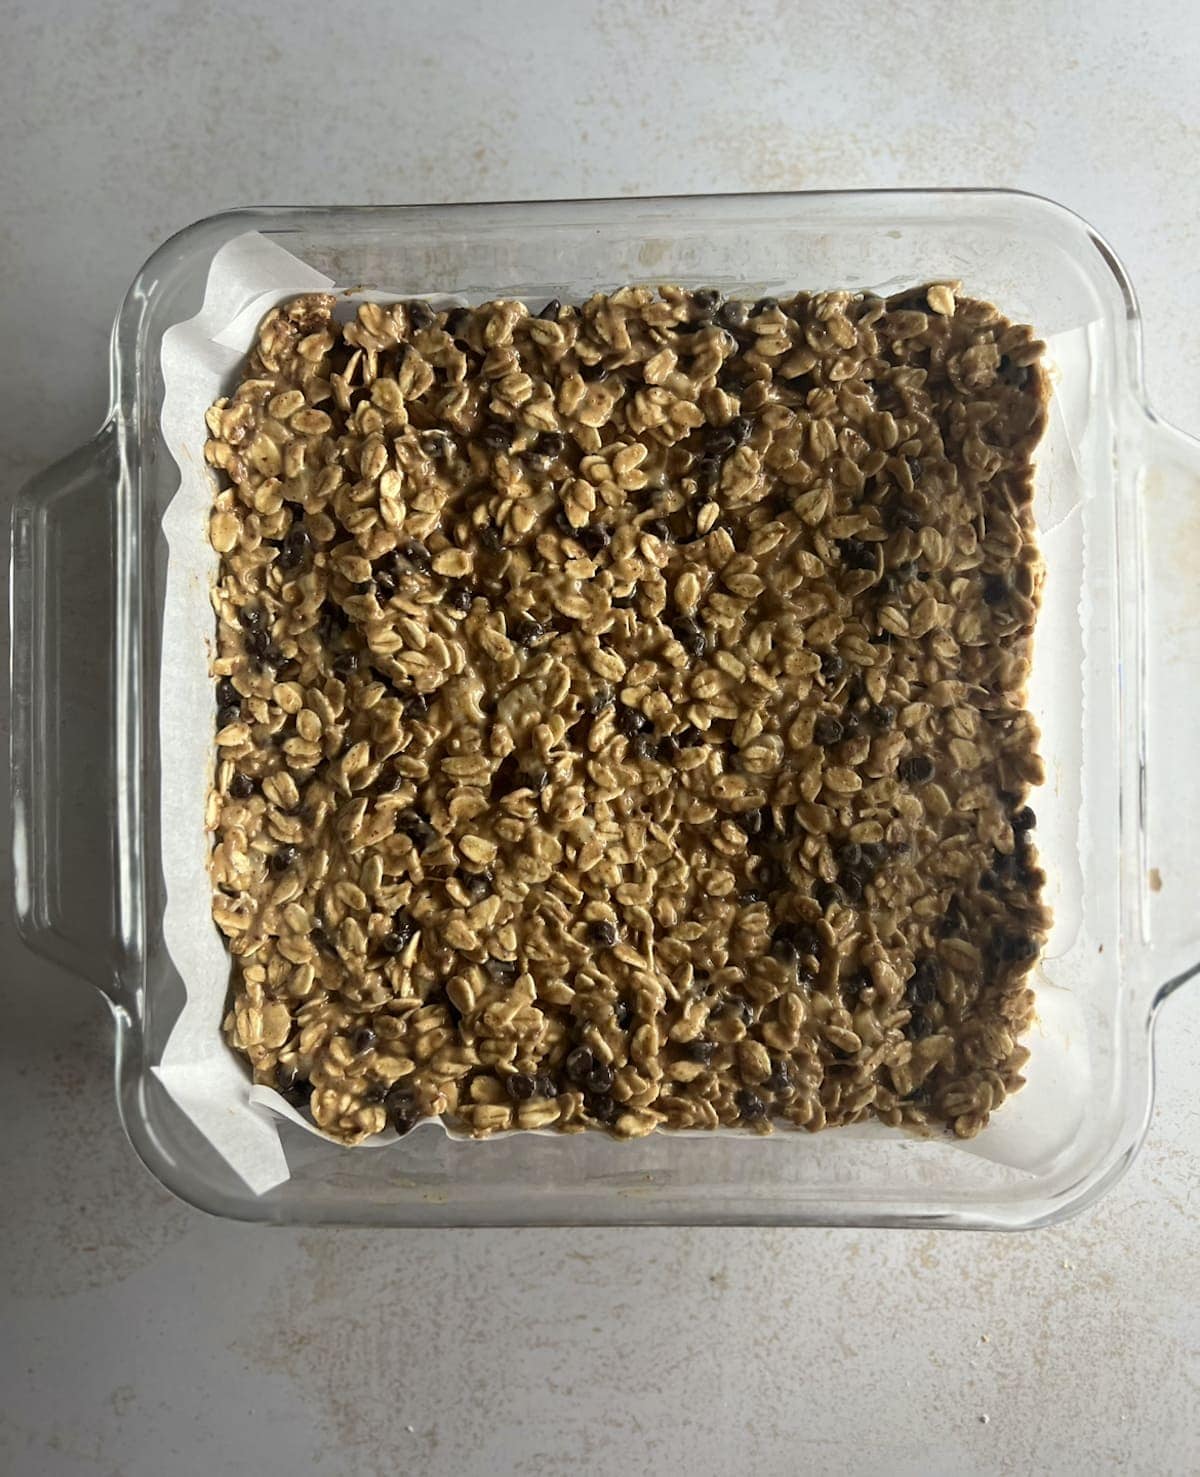 This is a photo of pre-cooked pb banana oatmeal bars.